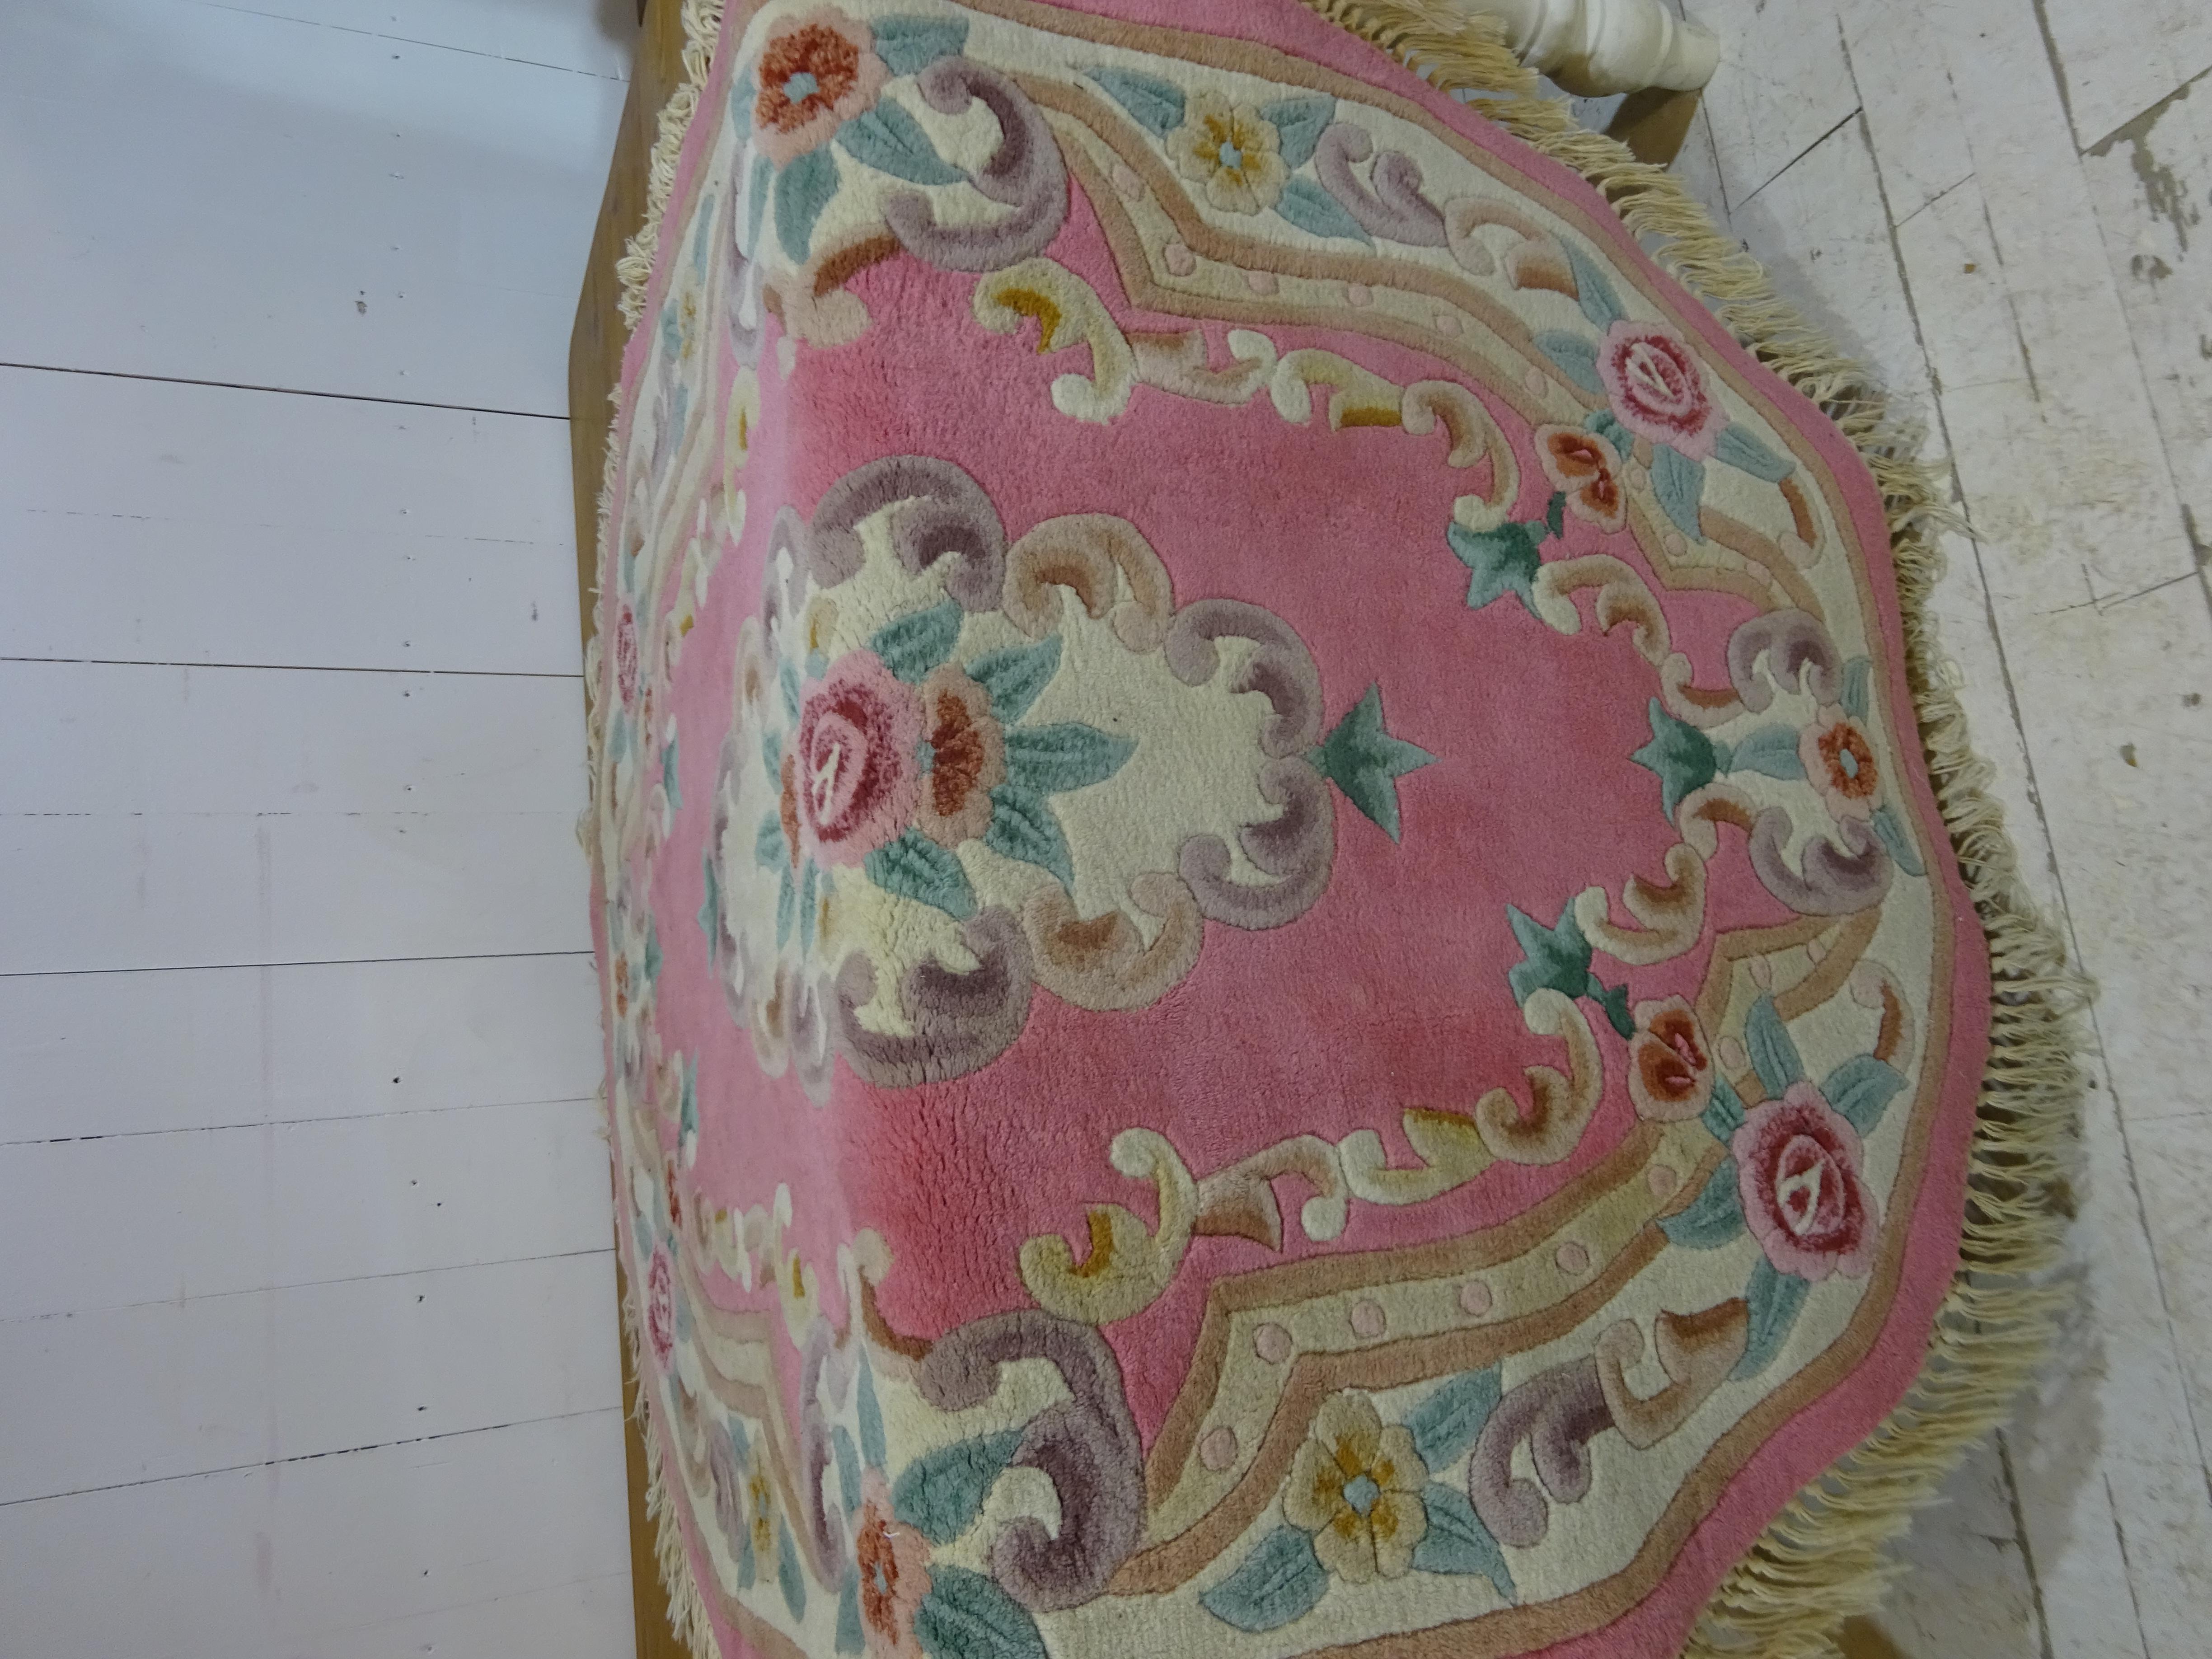 In the same family since new this rug was one of over 20 rugs imported in the mid 1920's from China. We have managed to source most these fabulous rugs which are ideal for any room.

The rug is pure wool and is carefully woven to provide a thick